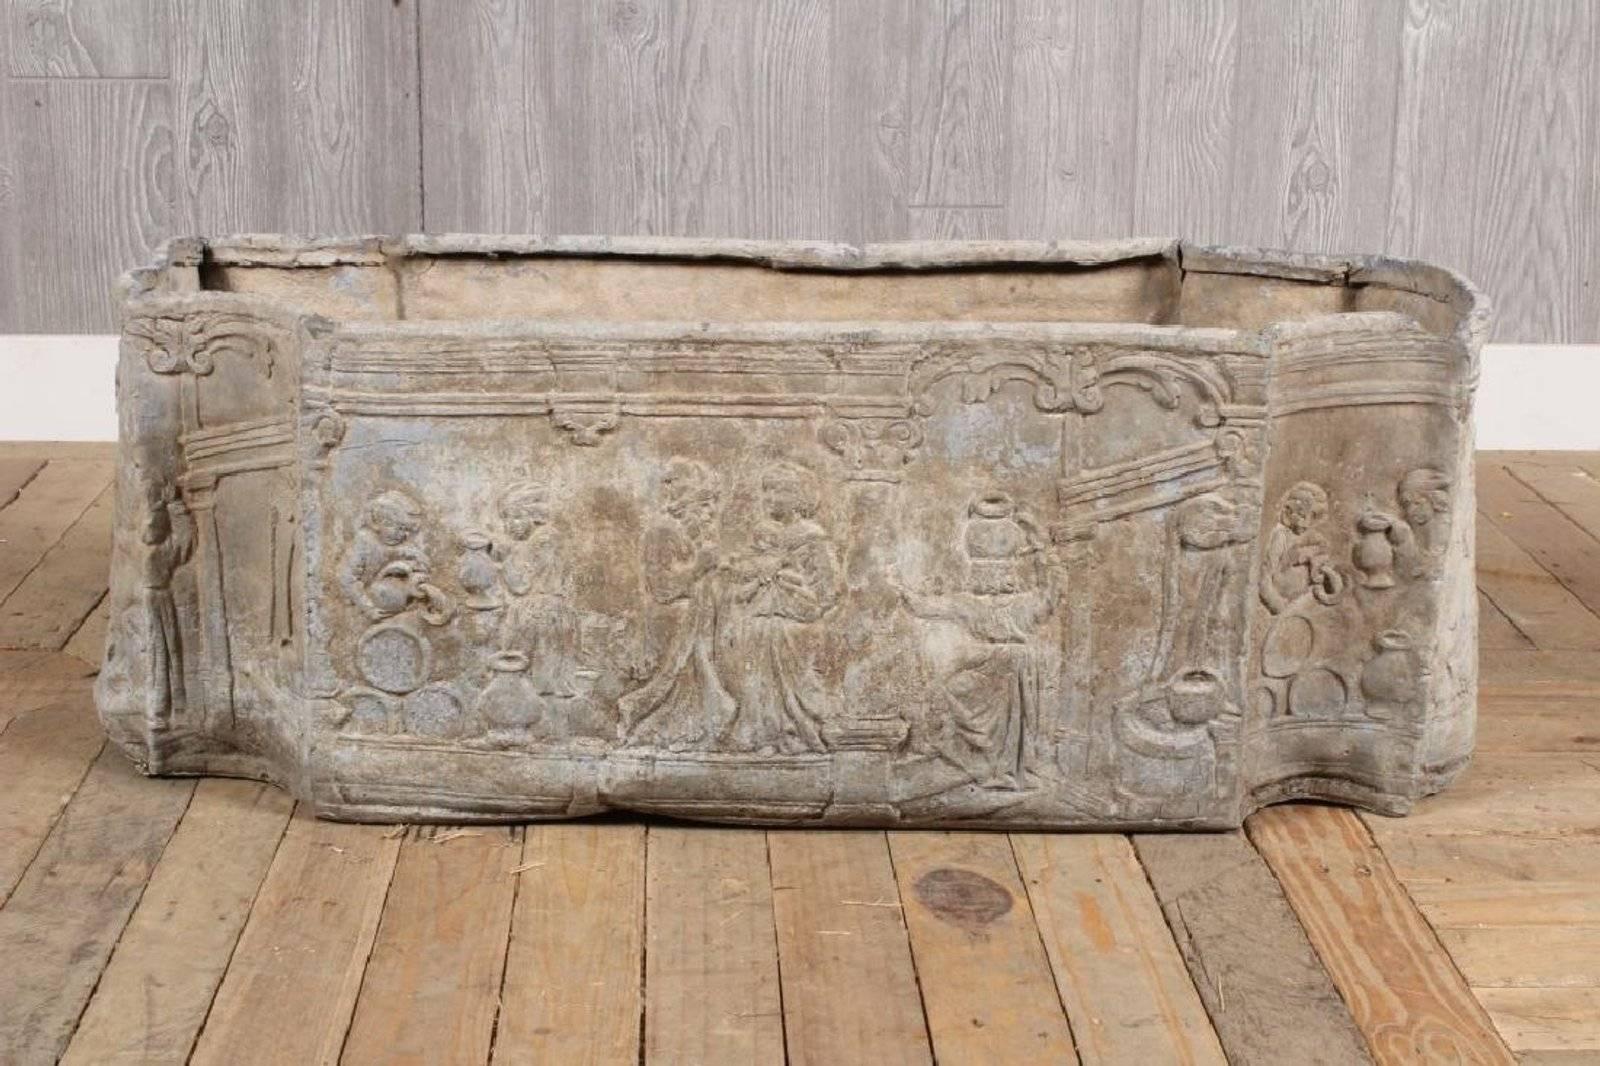 Beautiful shaped lead planter has figural detail on all sides of classical relief depicting daily village life. Generous size and gorgeous presence.